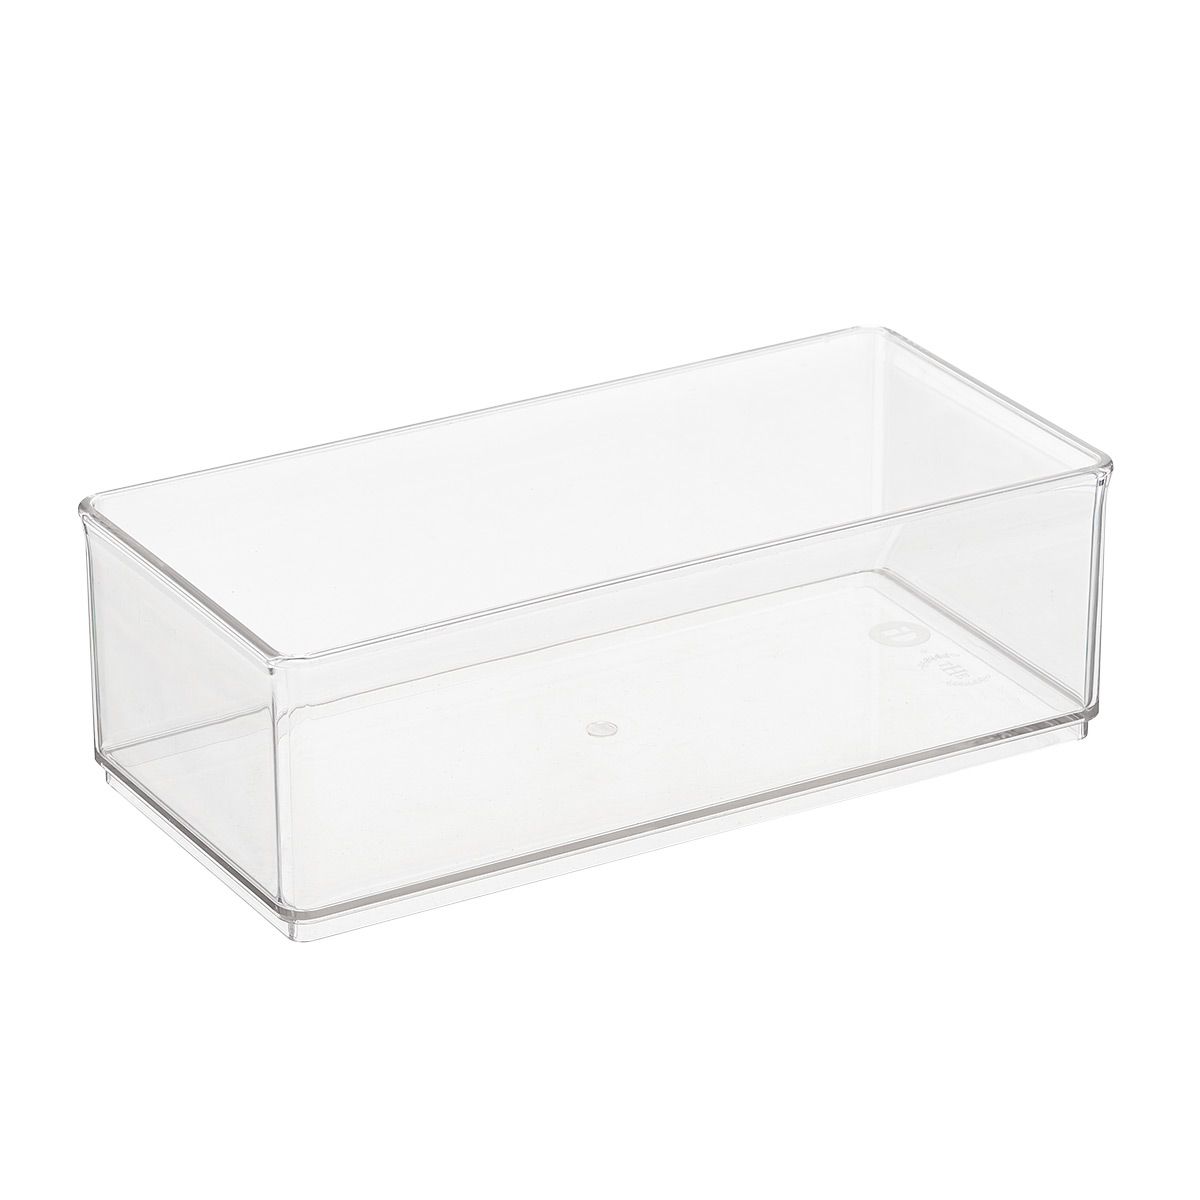 Large Bin Organizer | The Container Store